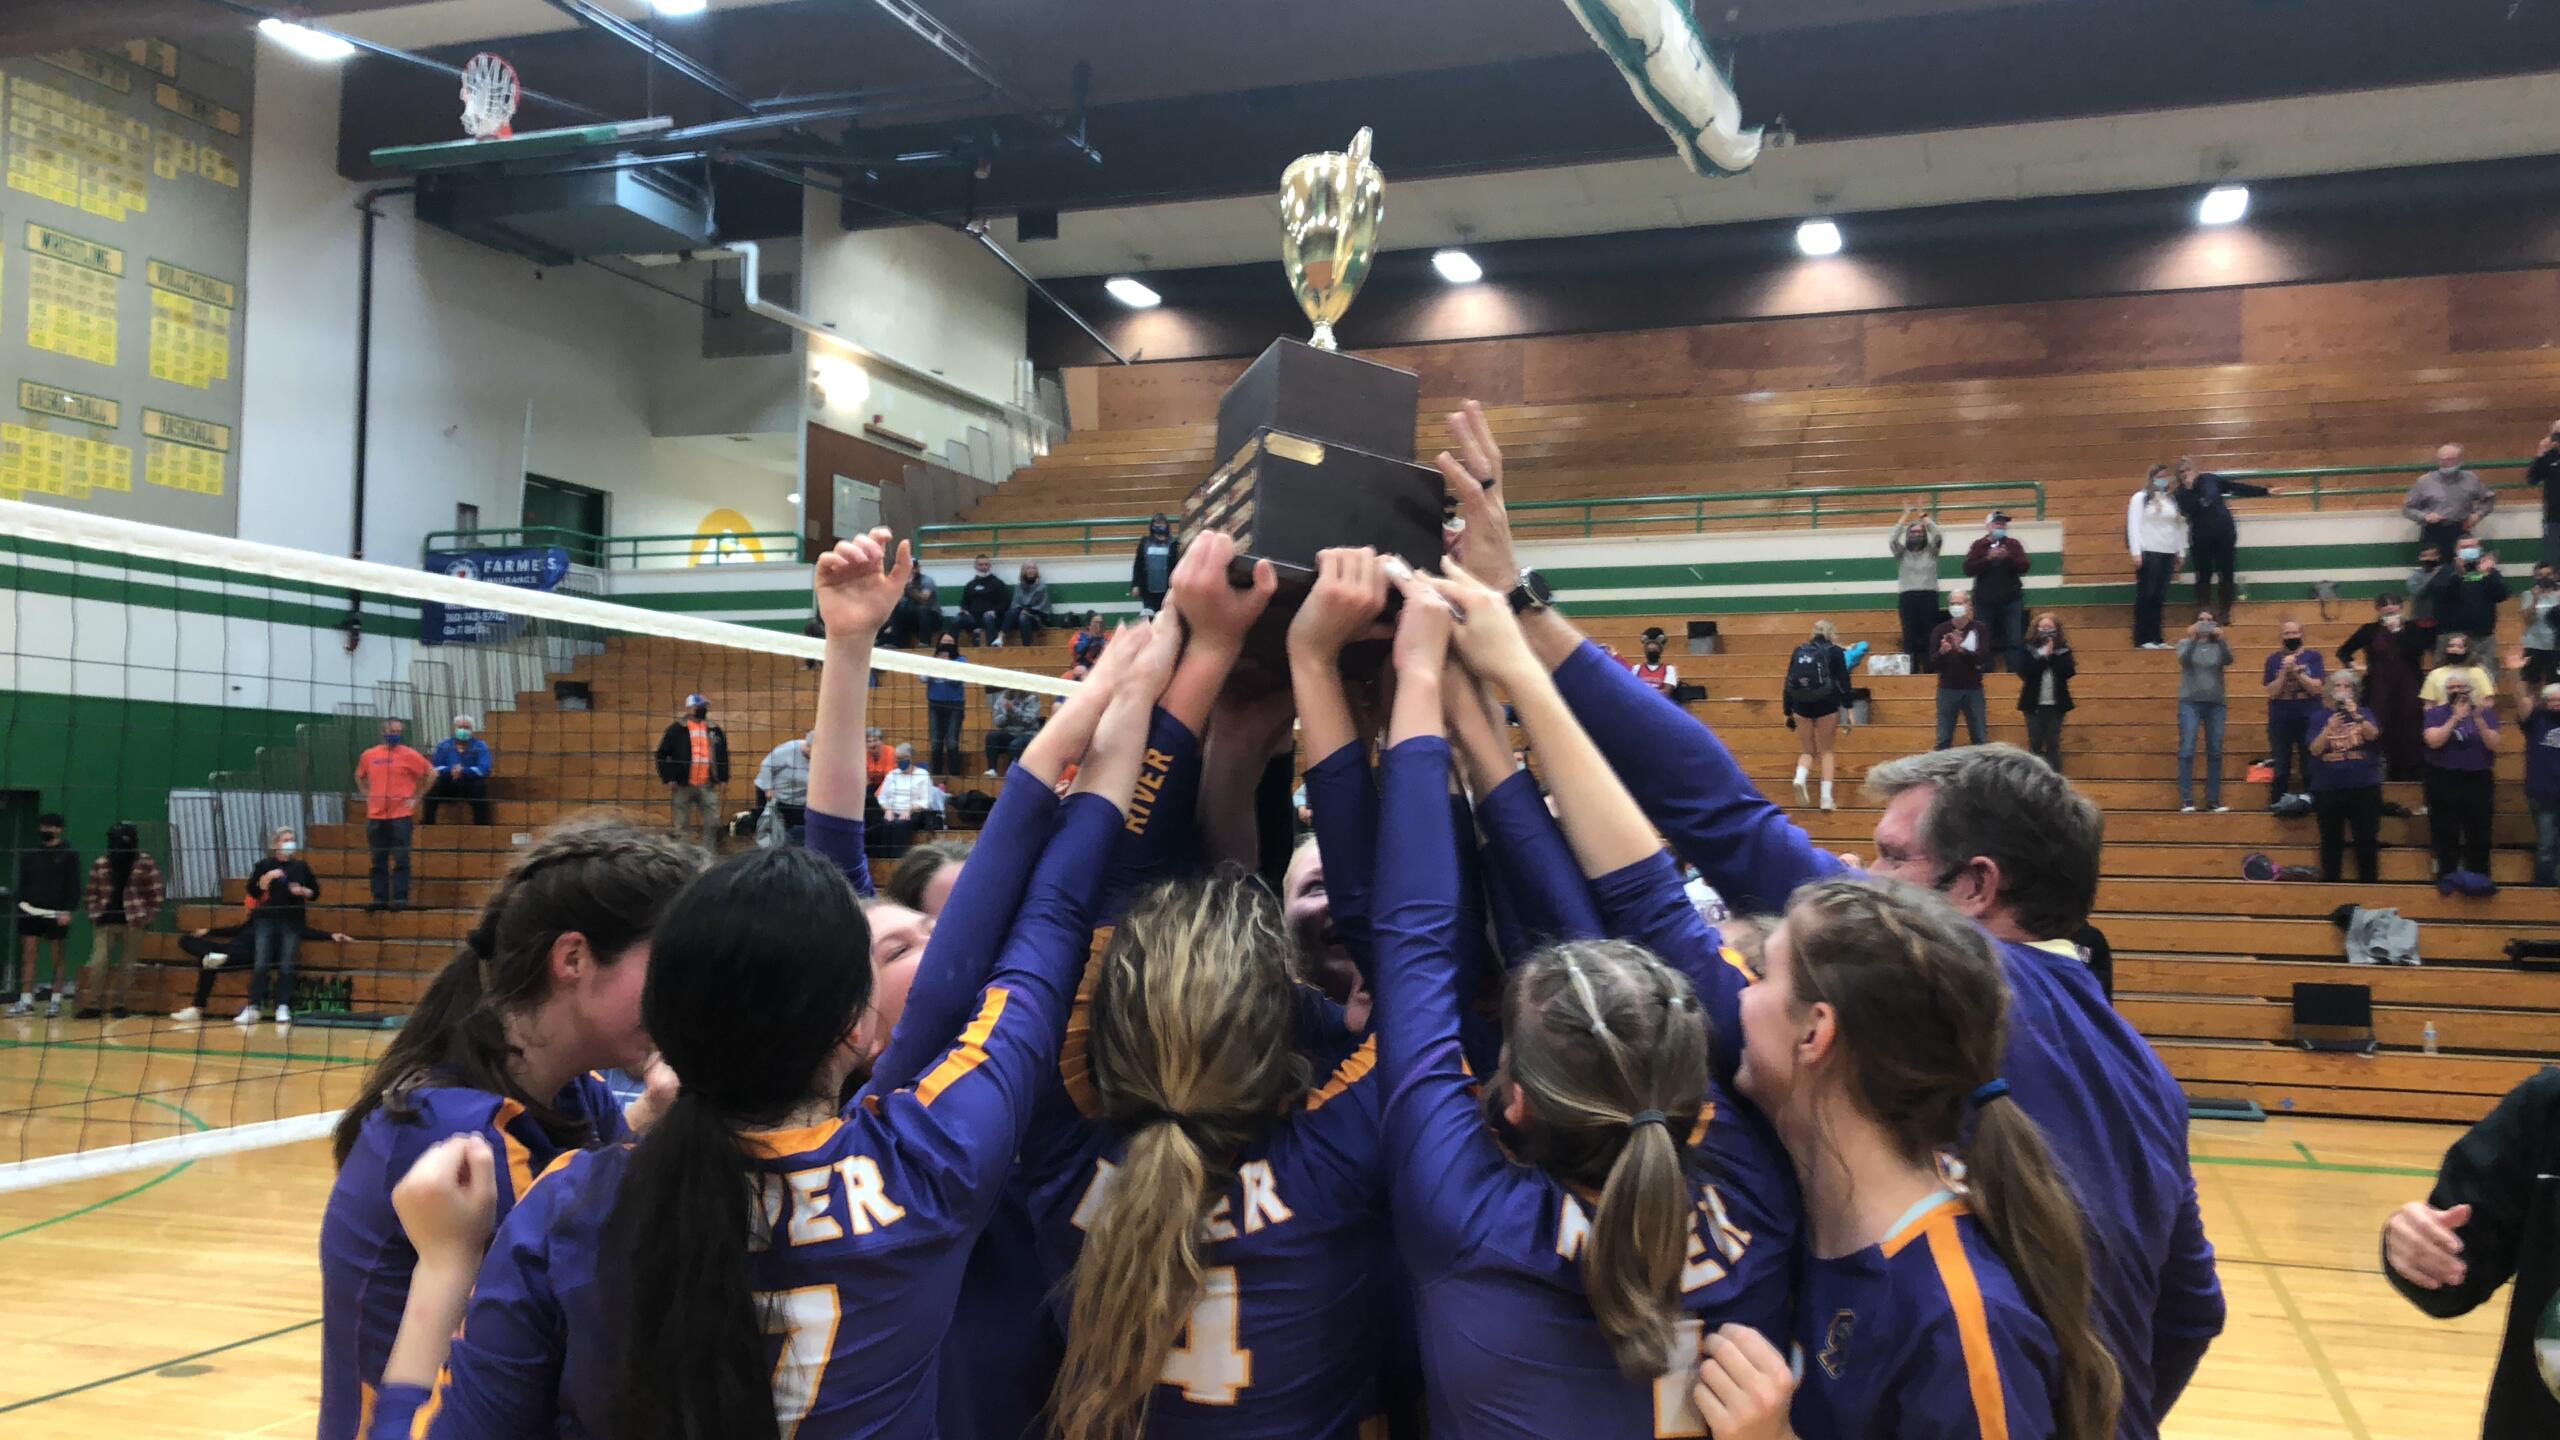 The Columbia River volleyball team hoists the district championship trophy after beating Ridgefield in five sets on Saturday at Tumwater High School.